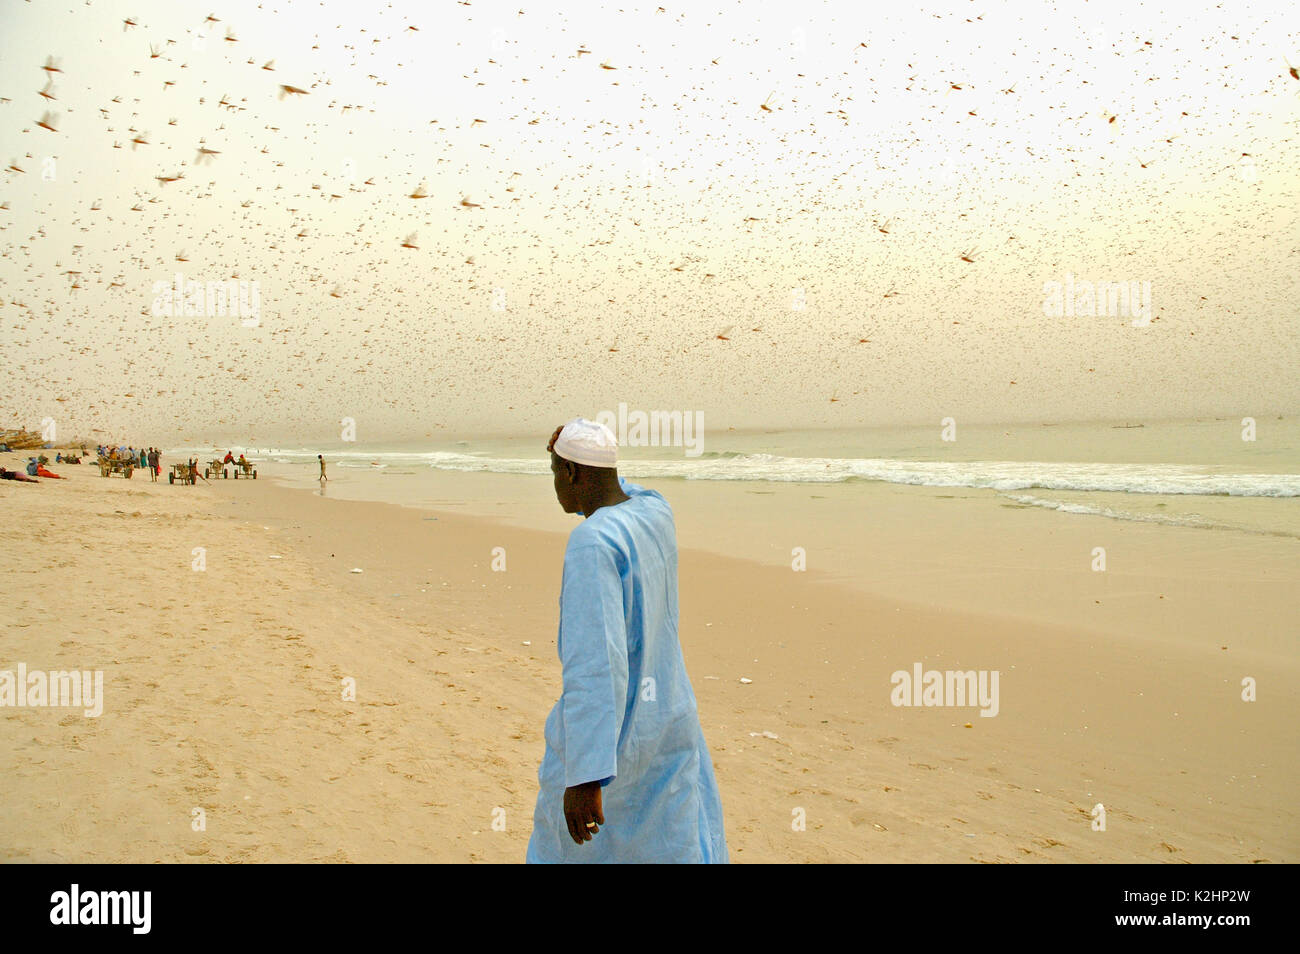 A fisherman protects himself from a swarm of locust plague in Nouakchott, Mauritania Stock Photo